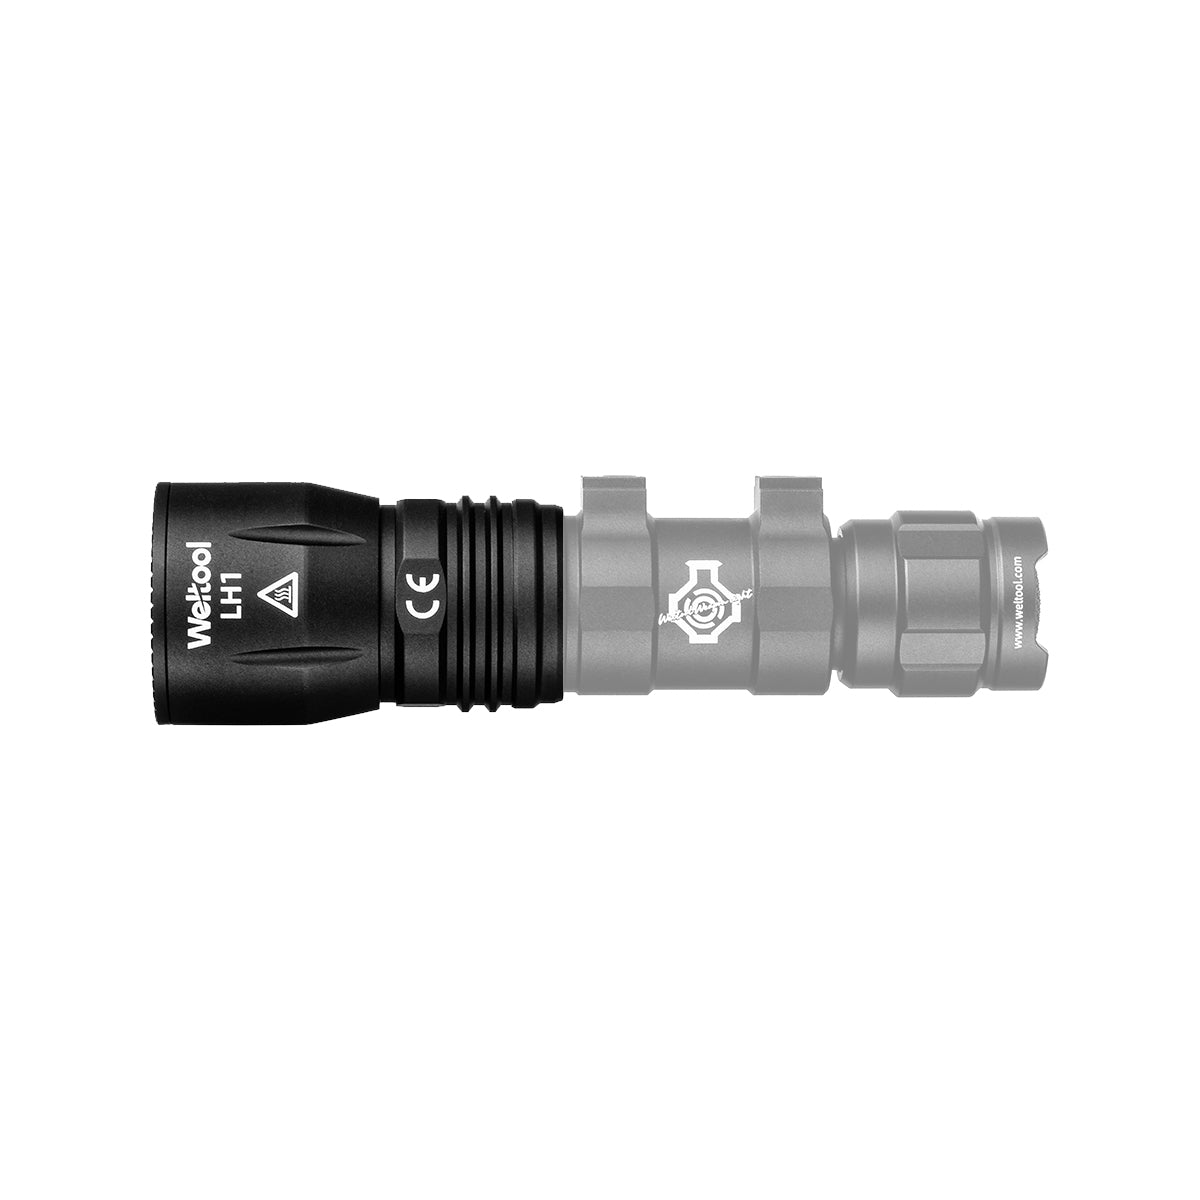 Weltool LH1 CW Light Head for Weaponlights